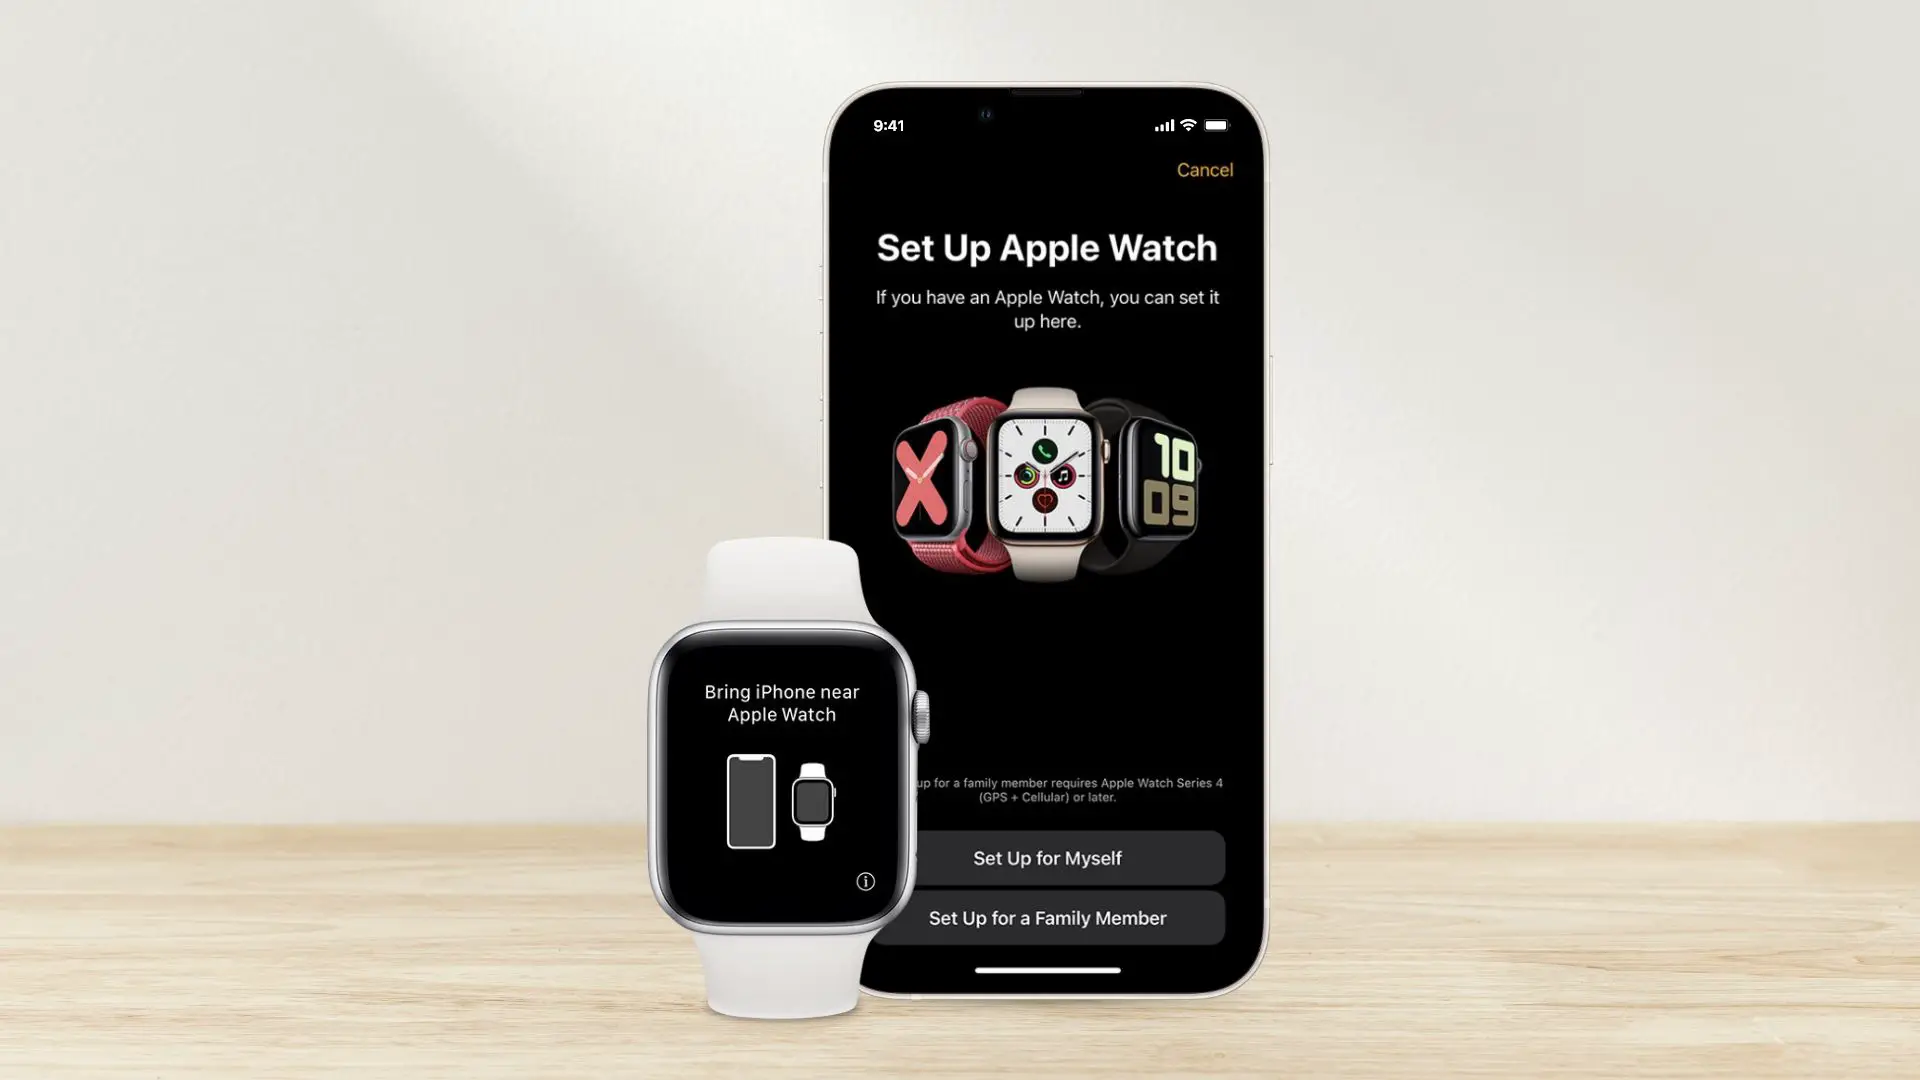 how to set up Apple Watch on iPhone